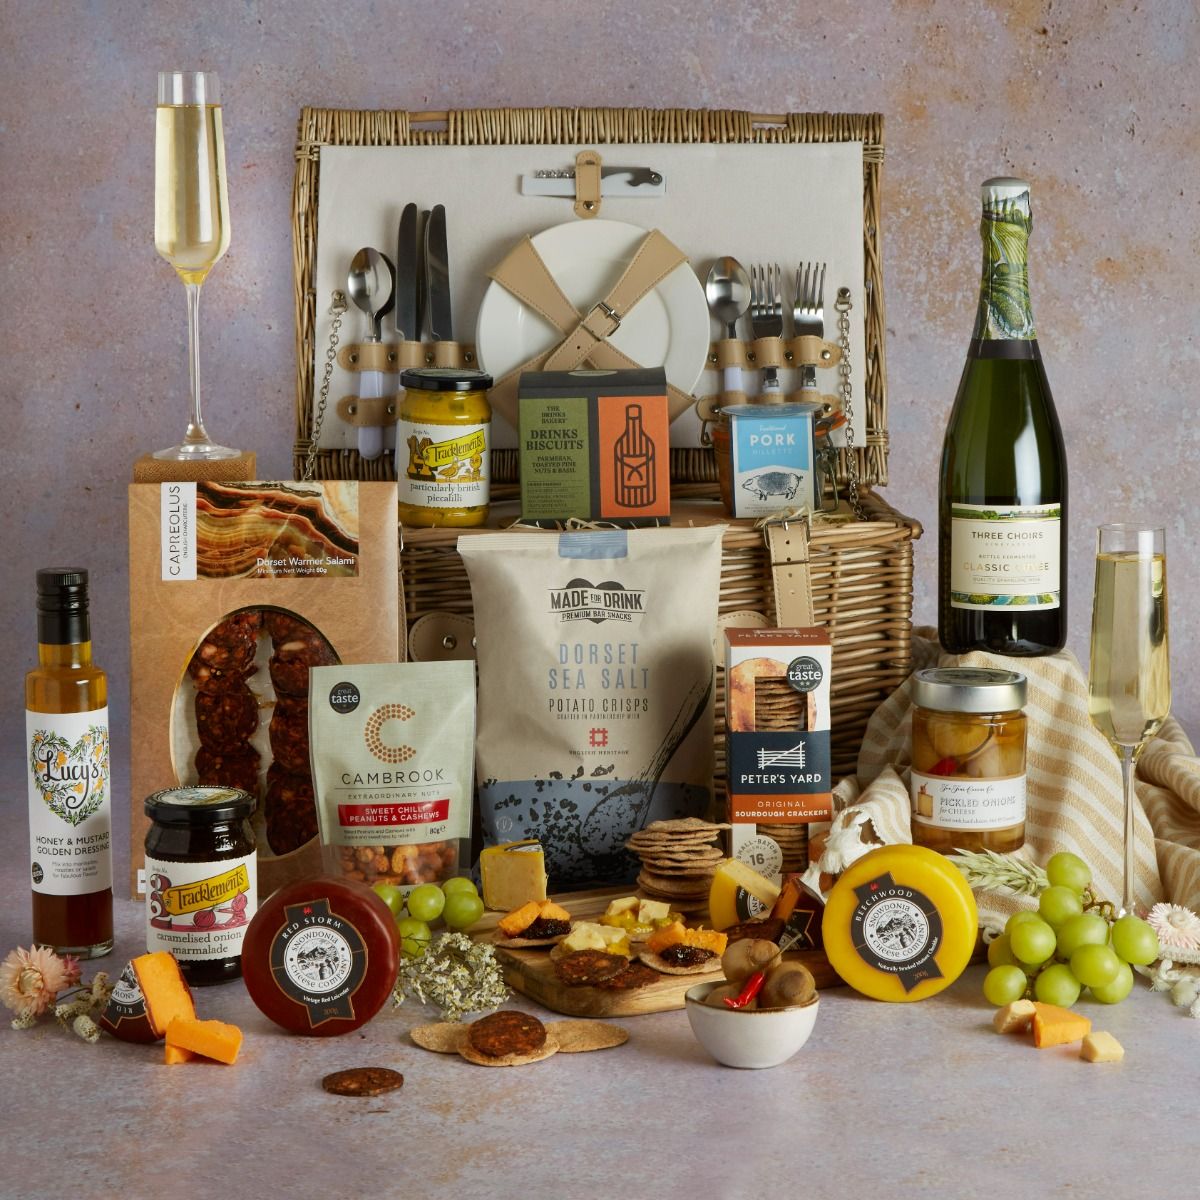 Best of British Picnic Hamper for Four with picnic basket open and food and drink contents on display